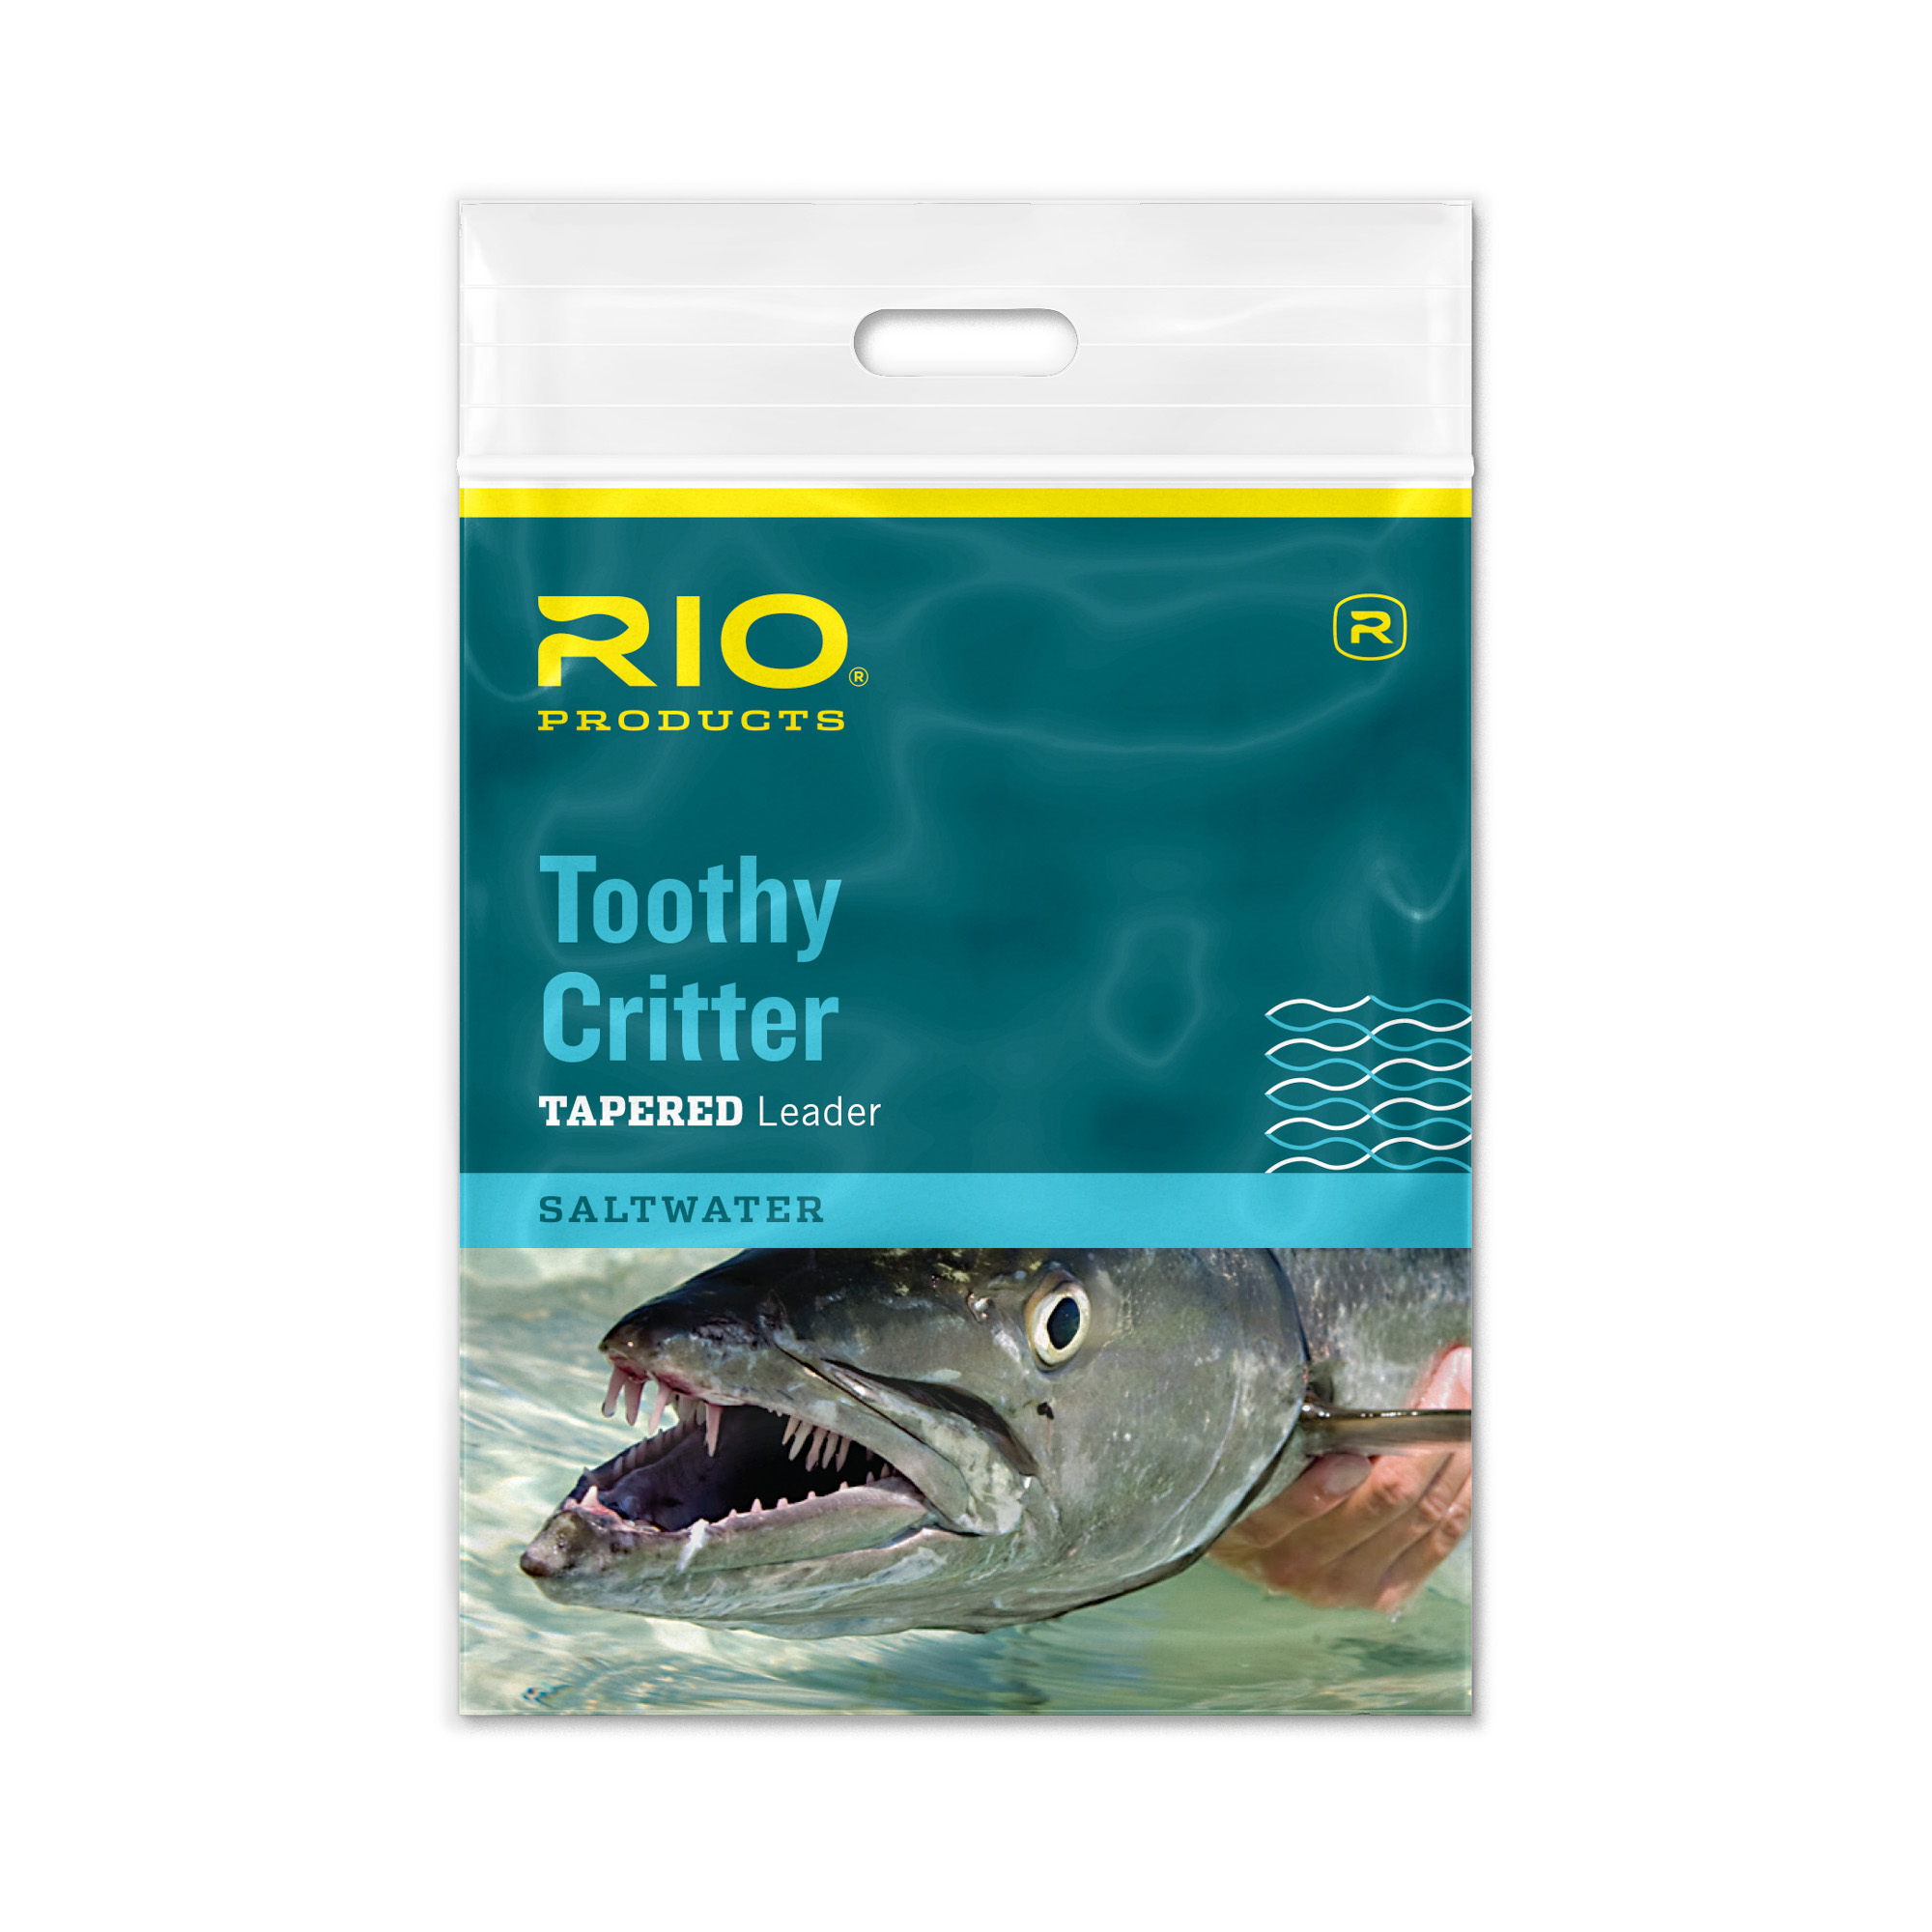 RIO Toothy Critter (7.5′) Leader – Guide Flyfishing